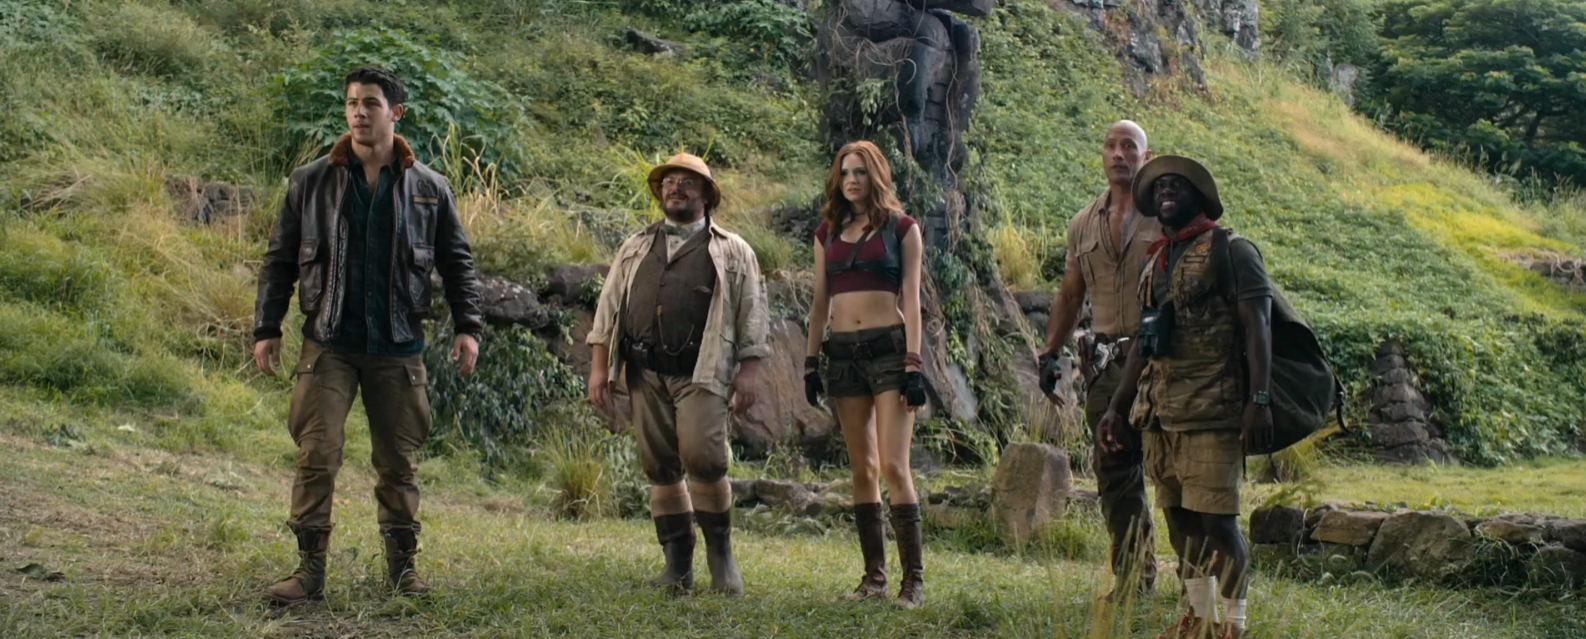 Jumanji: Welcome to the Jungle Movie Review